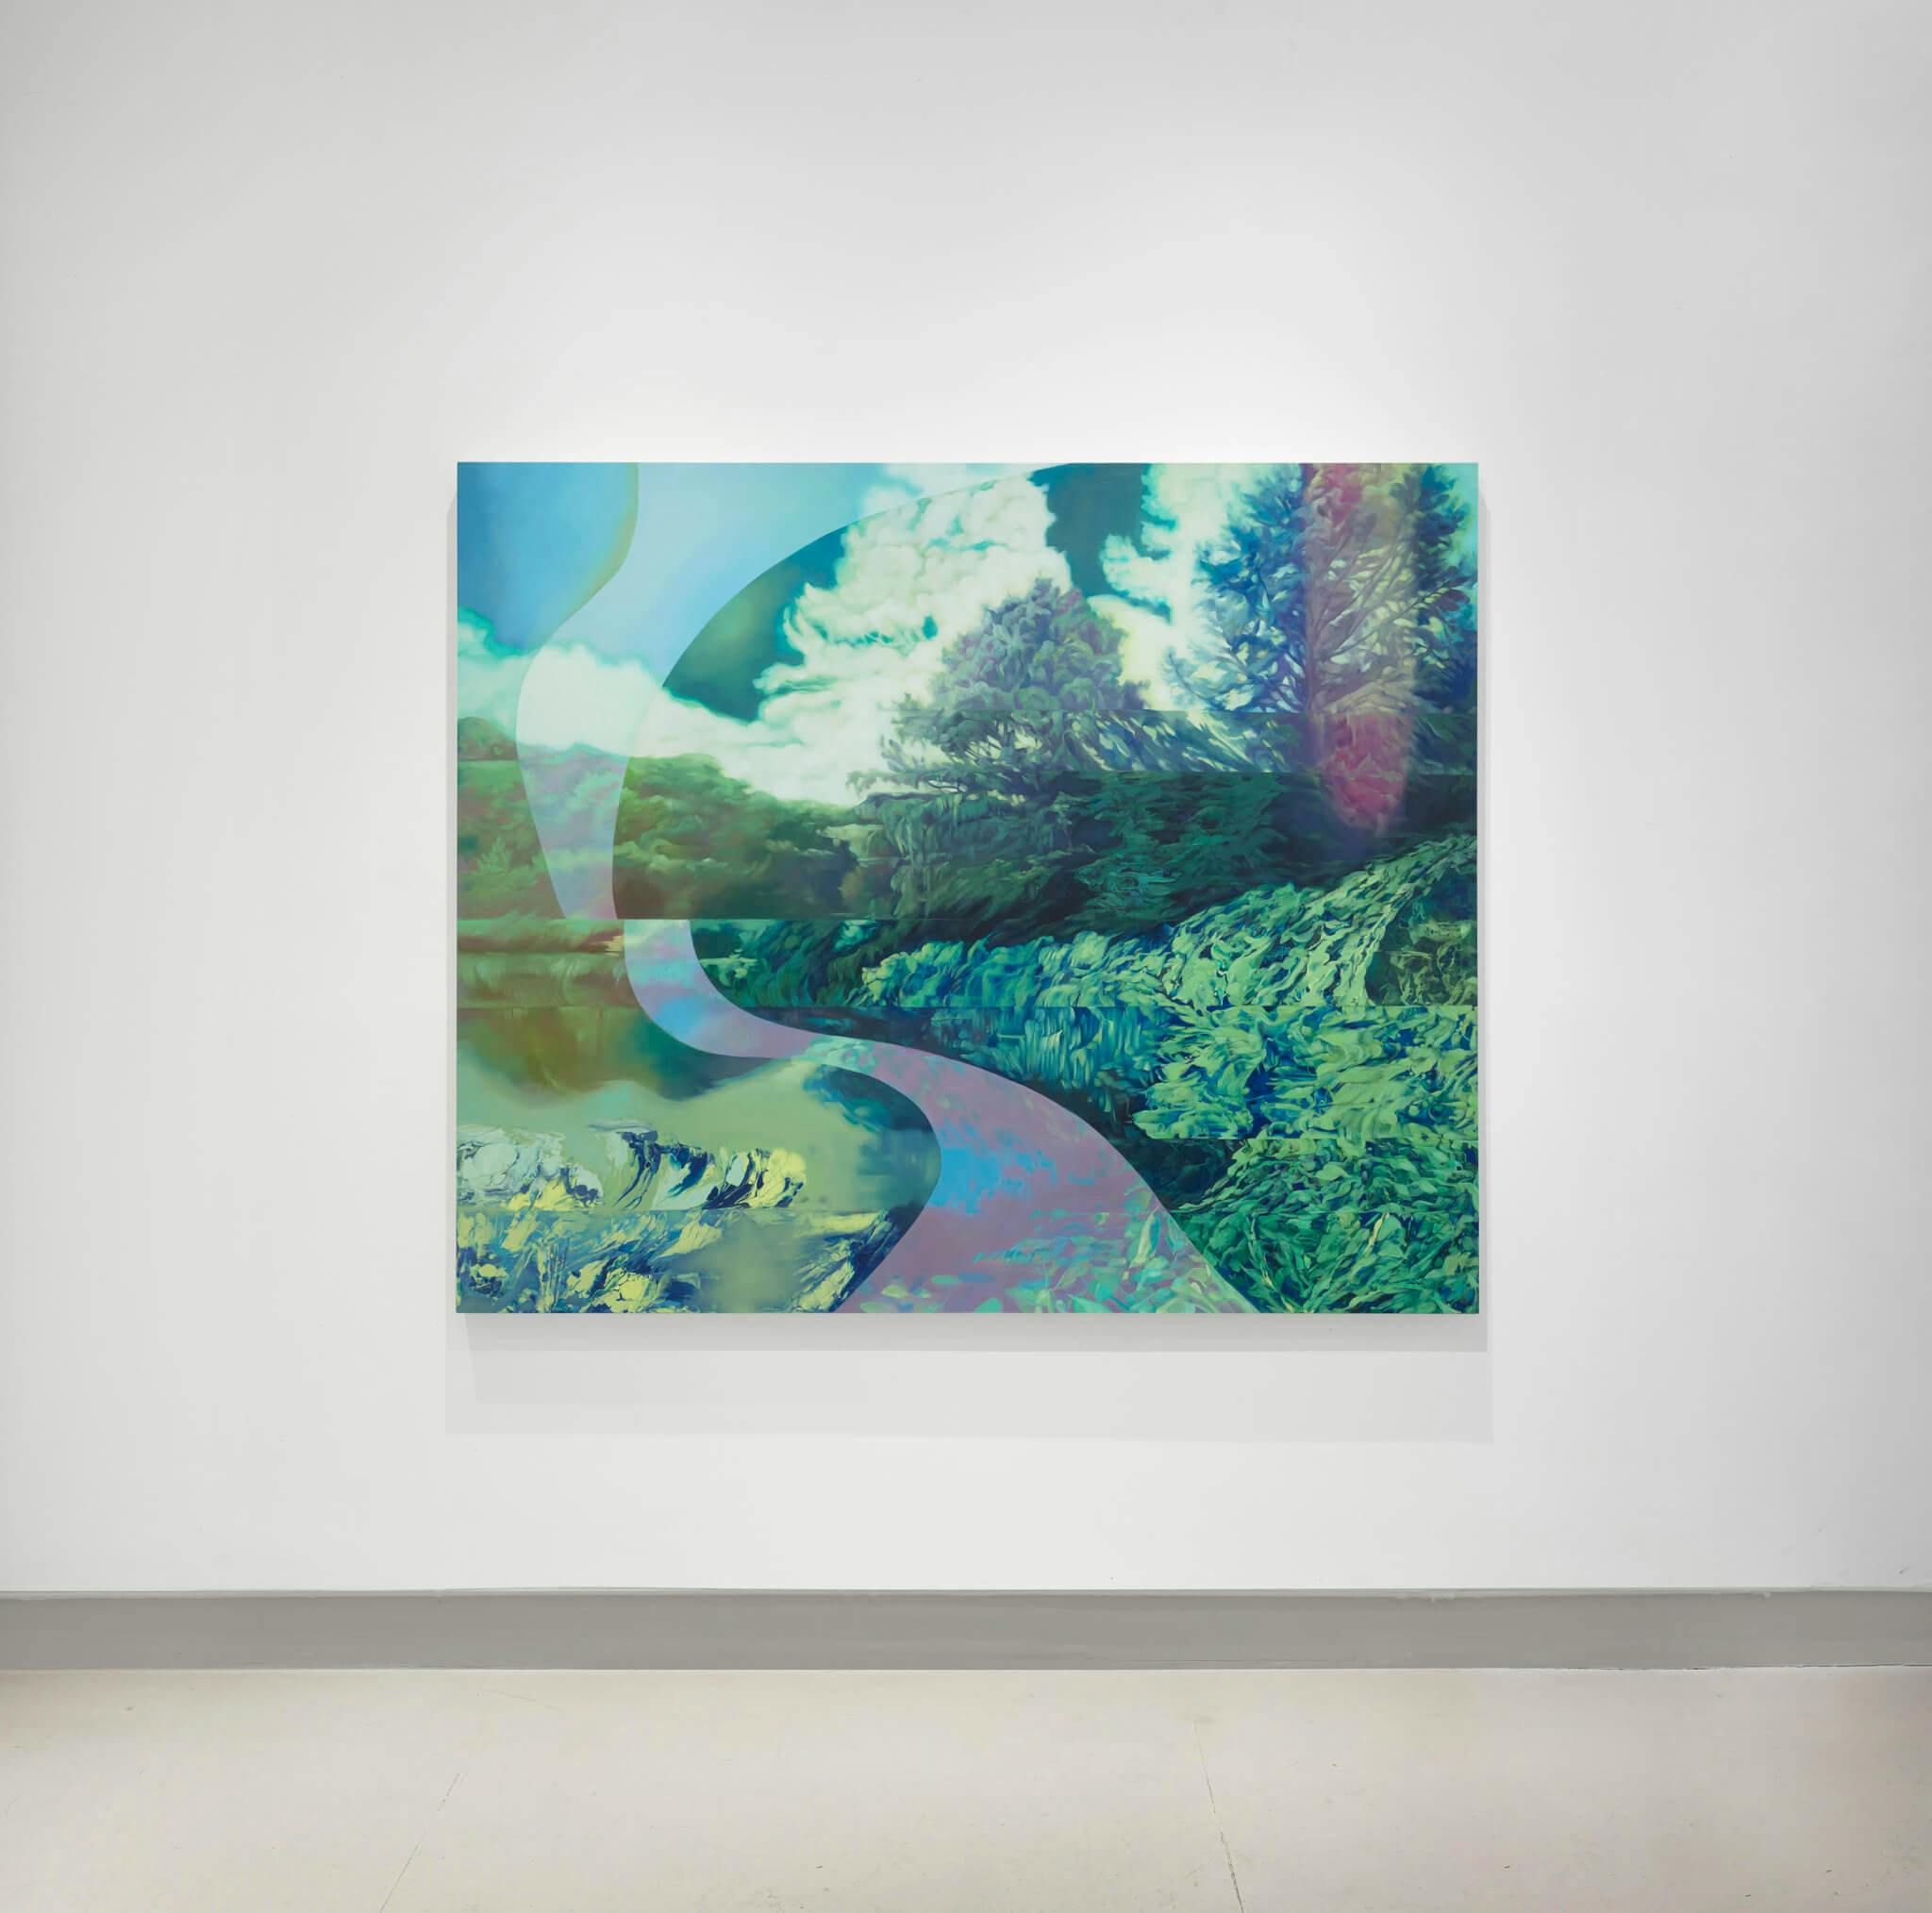 Installation view of a painting of a distorted path winding through the forest.